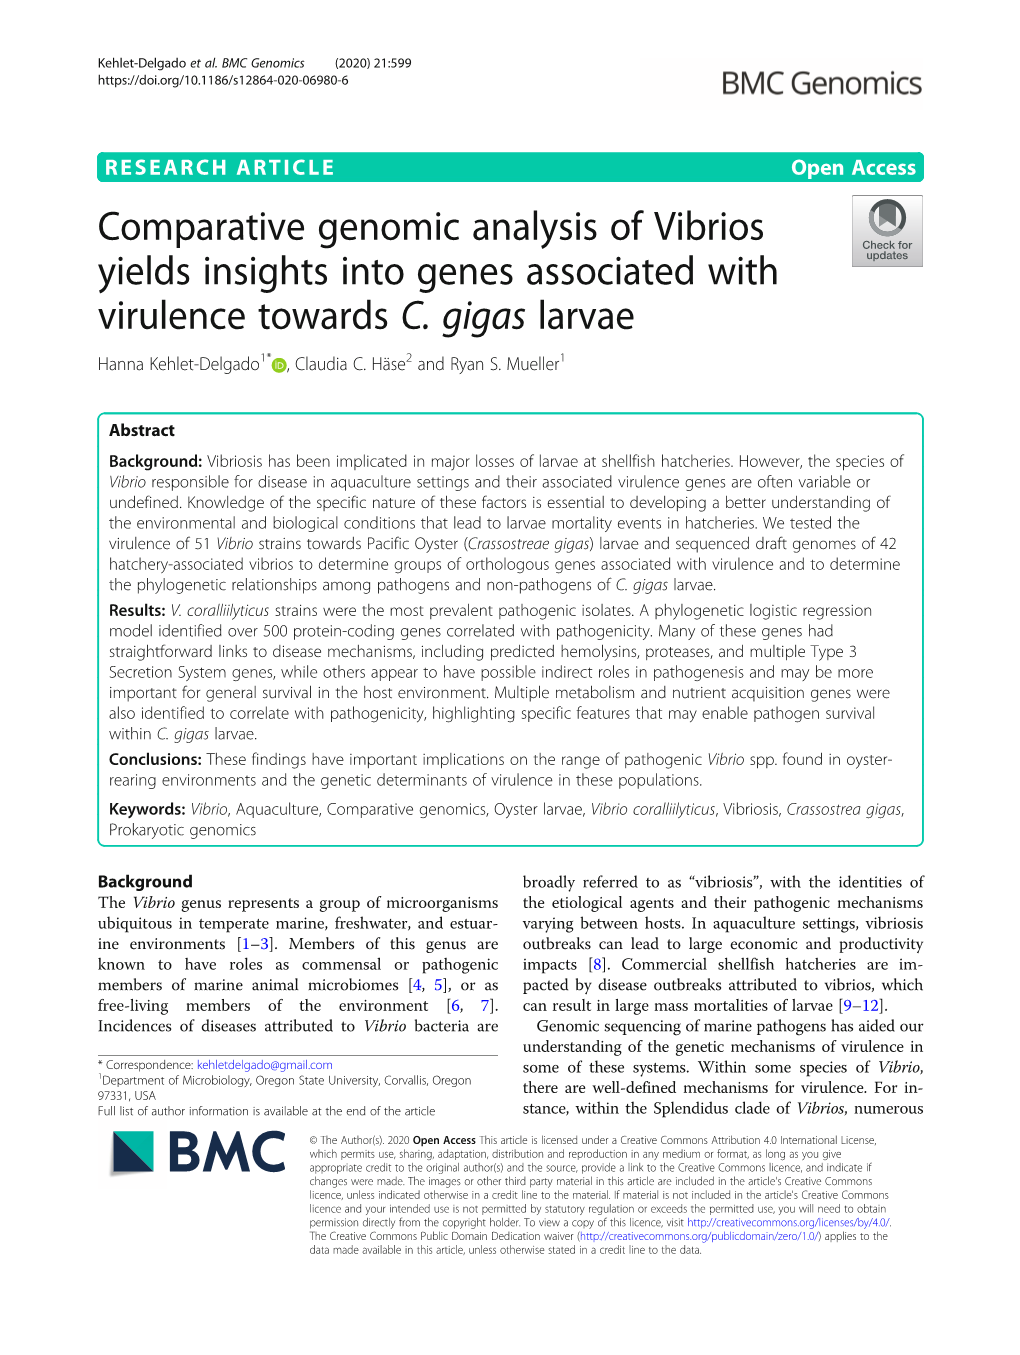 Comparative Genomic Analysis of Vibrios Yields Insights Into Genes Associated with Virulence Towards C